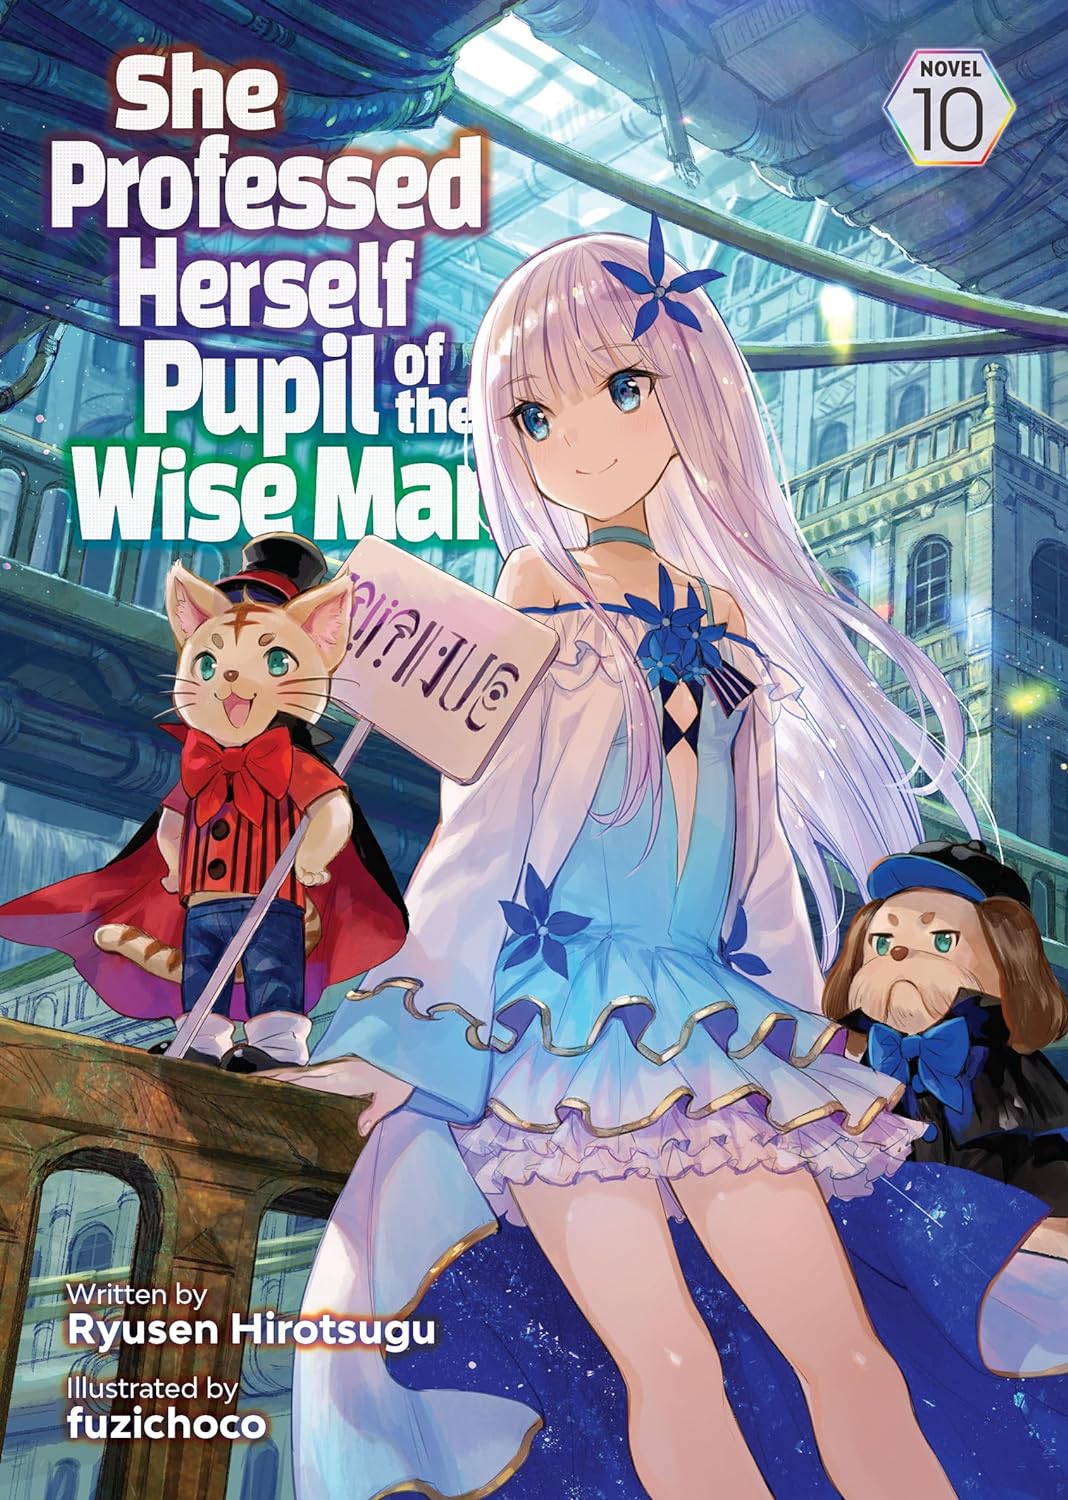 (23/04/2024) She Professed Herself Pupil of the Wise Man (Light Novel) Vol. 10